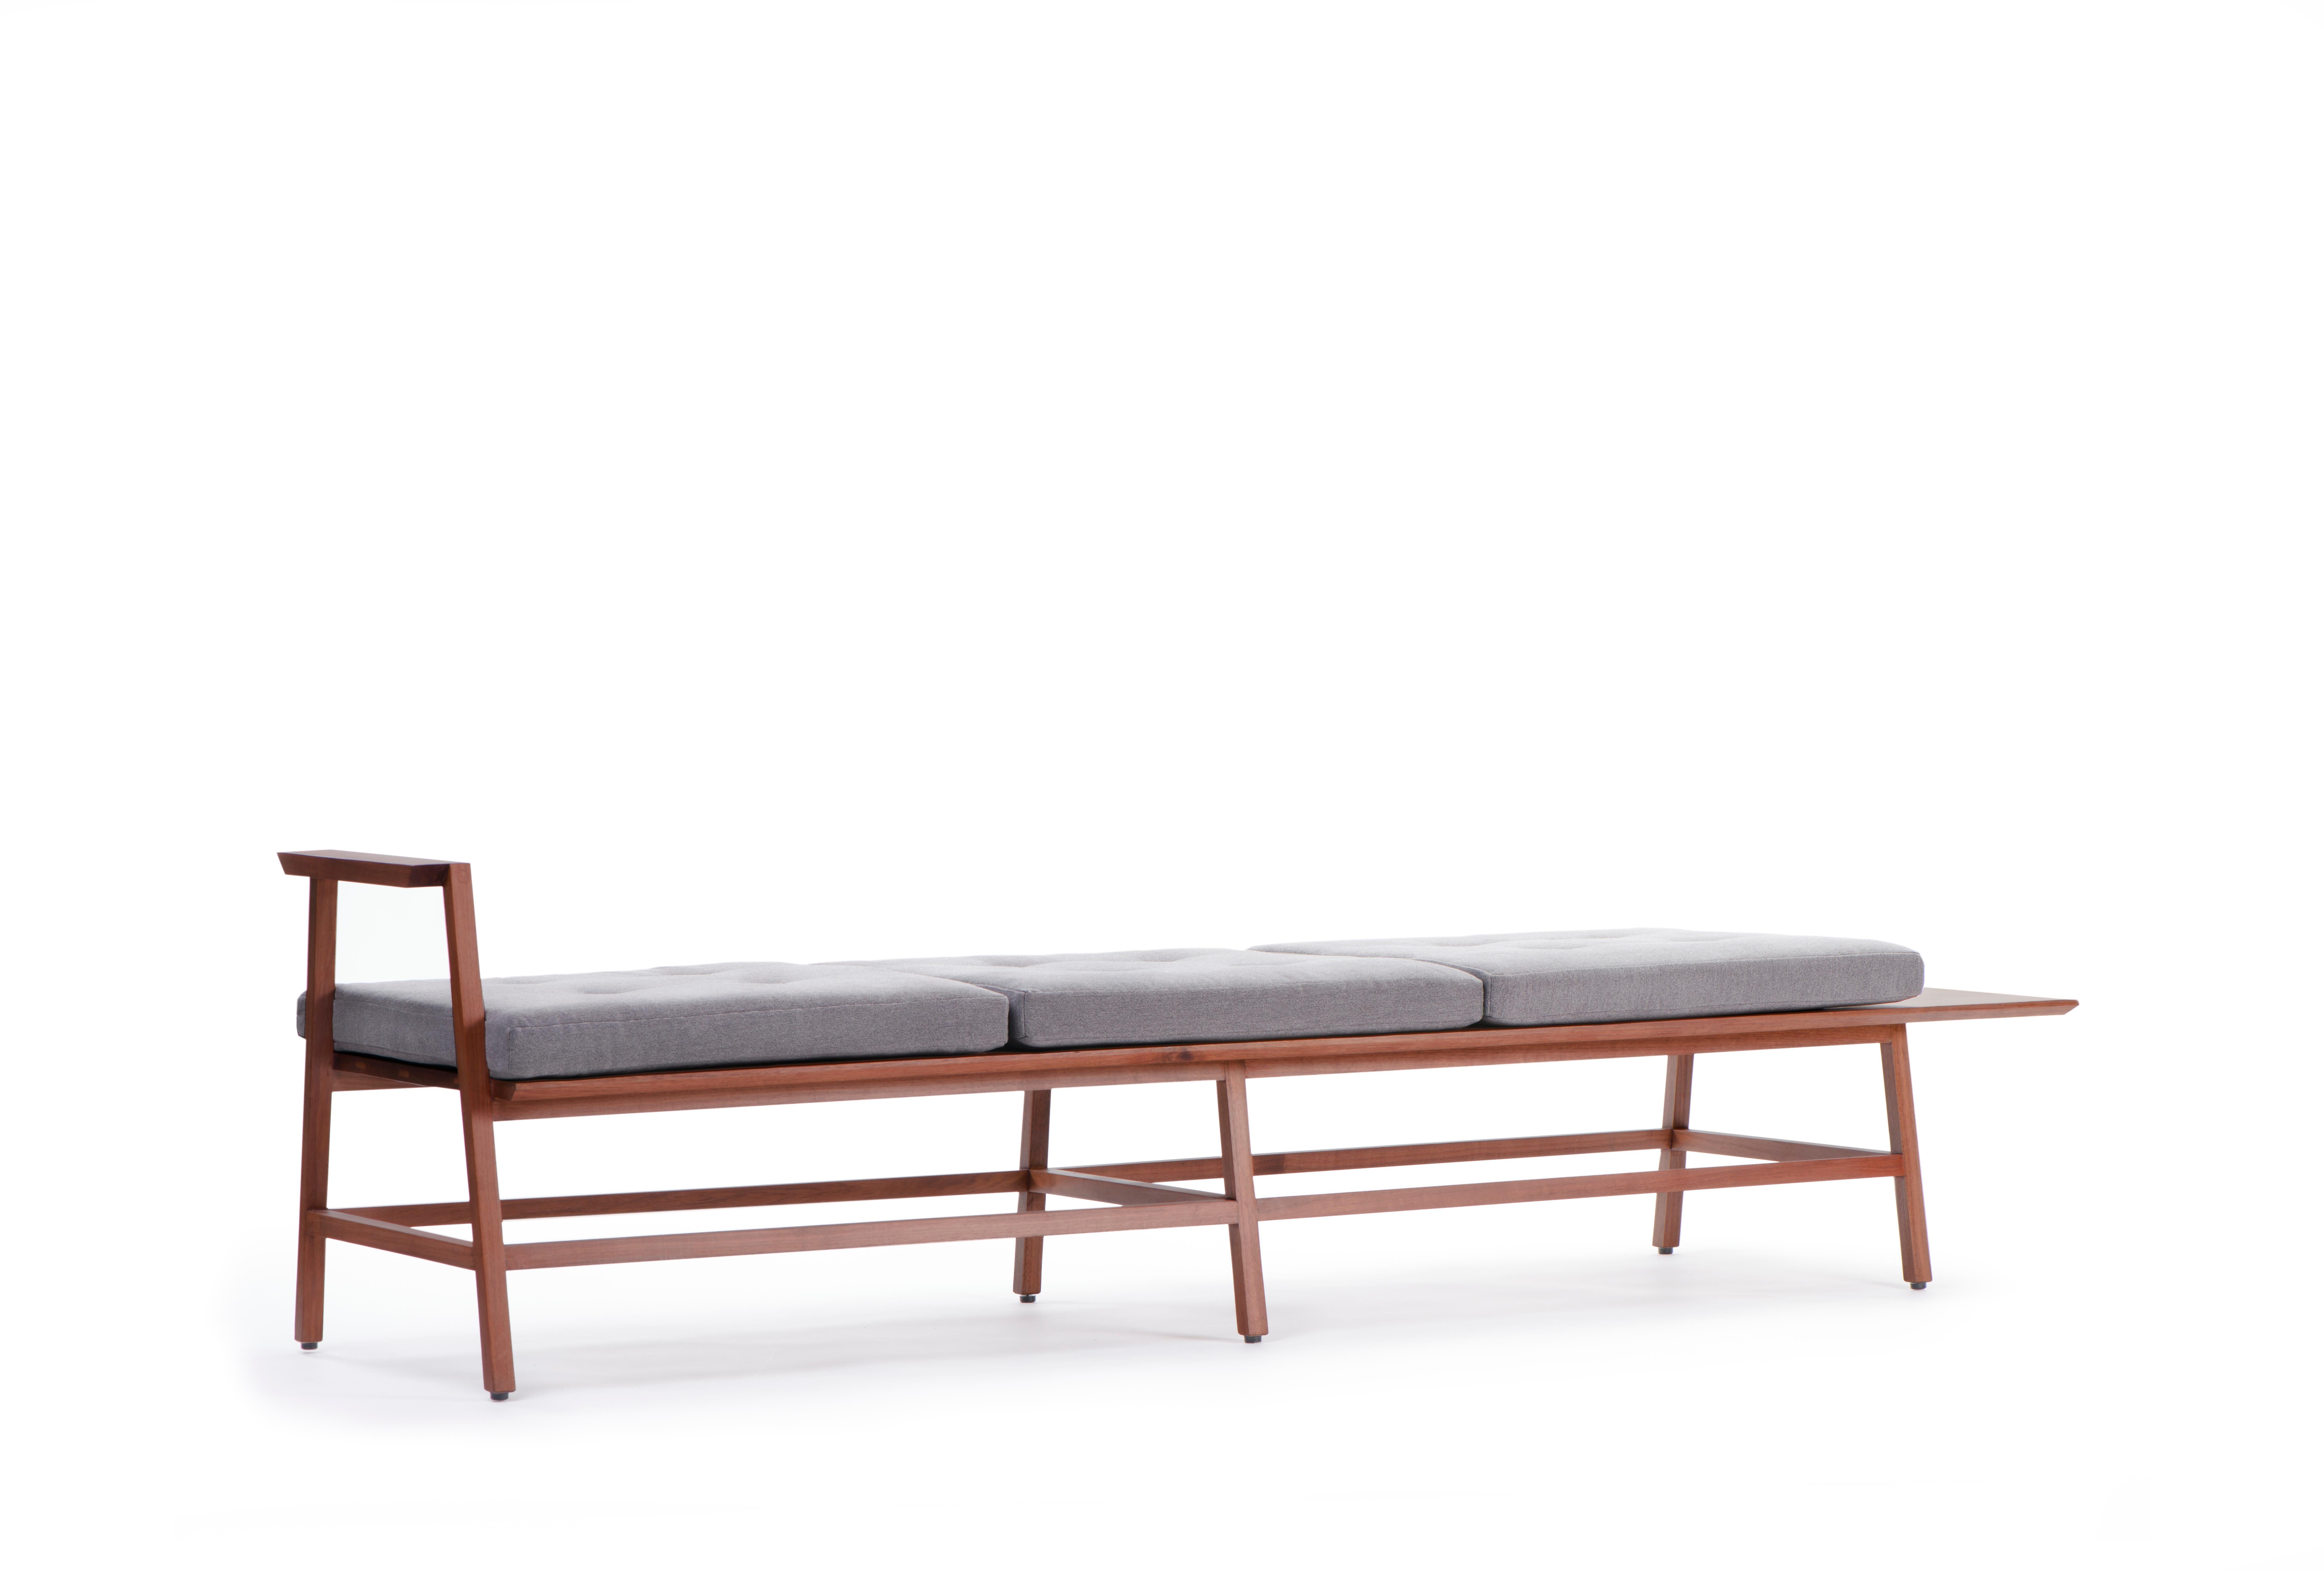 Modern Banca Dedo, Mexican Contemporary 3-Seat Bench by Emiliano Molina for Cuchara For Sale